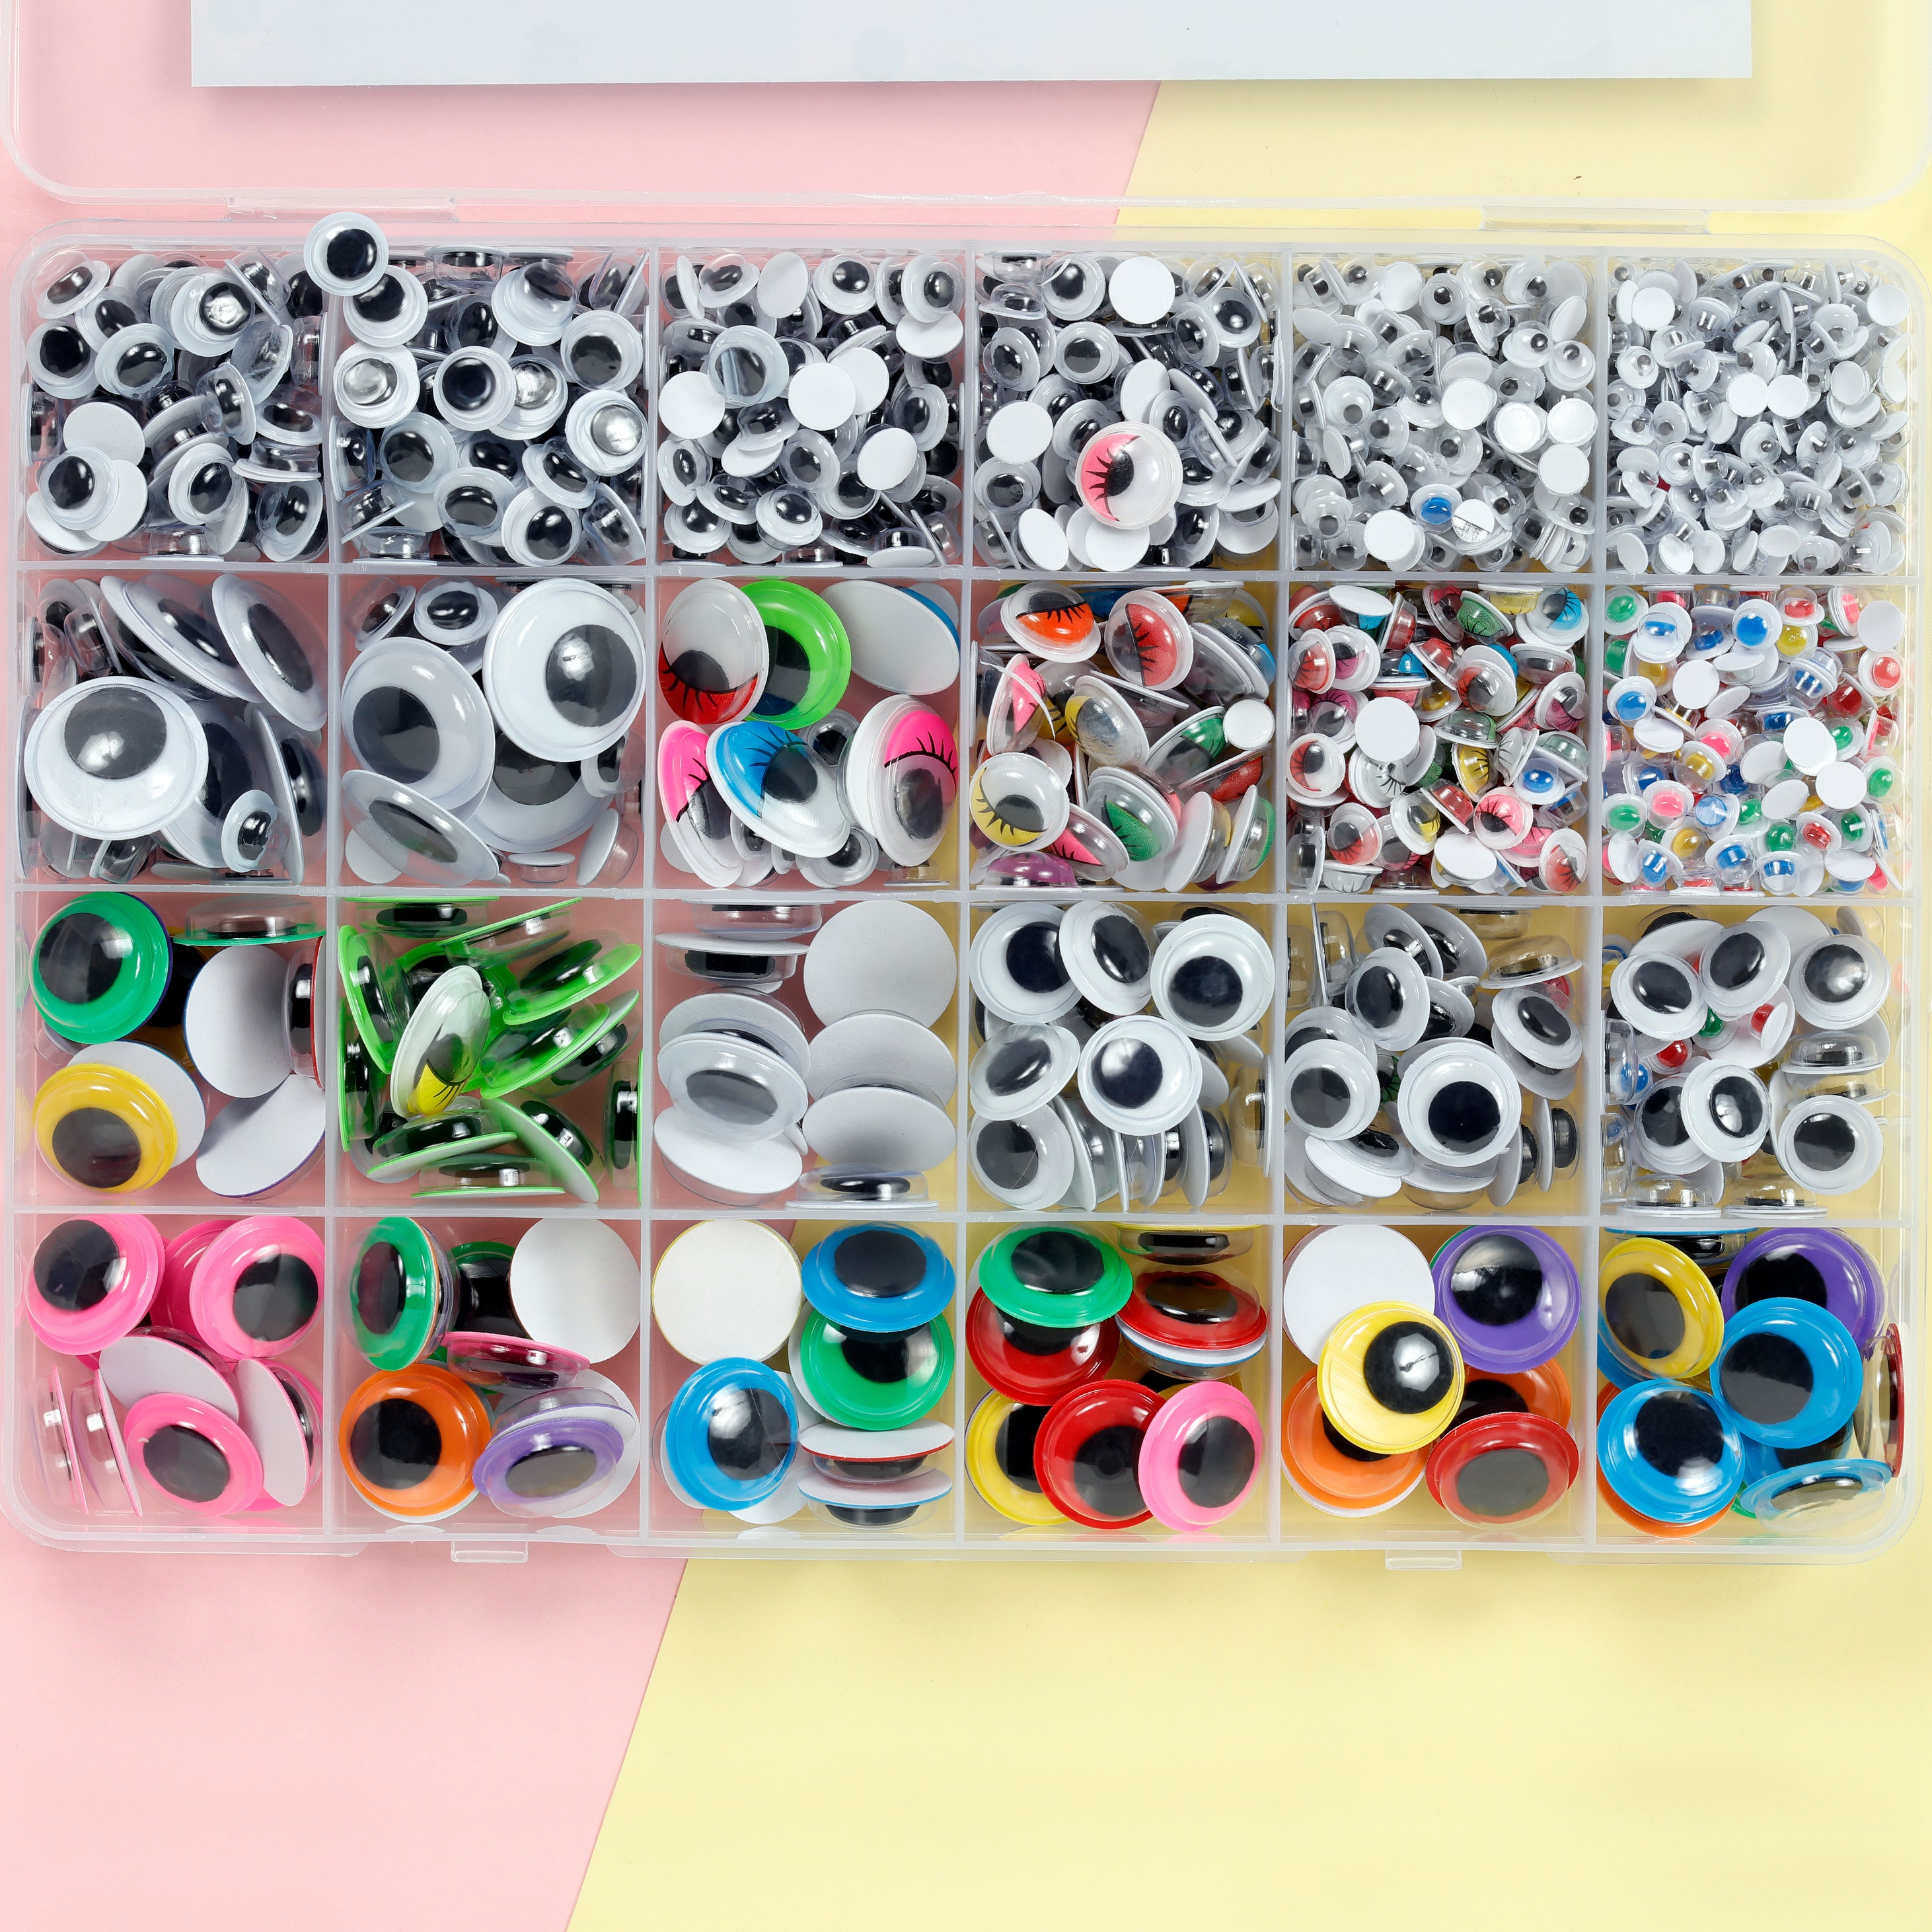 42-120pcs Colorful Self-adhesive Wobbly Googly Eyes for DIY Scrapbooking  Crafts Supplies Dolls Accessories Eyes Handmade Toys